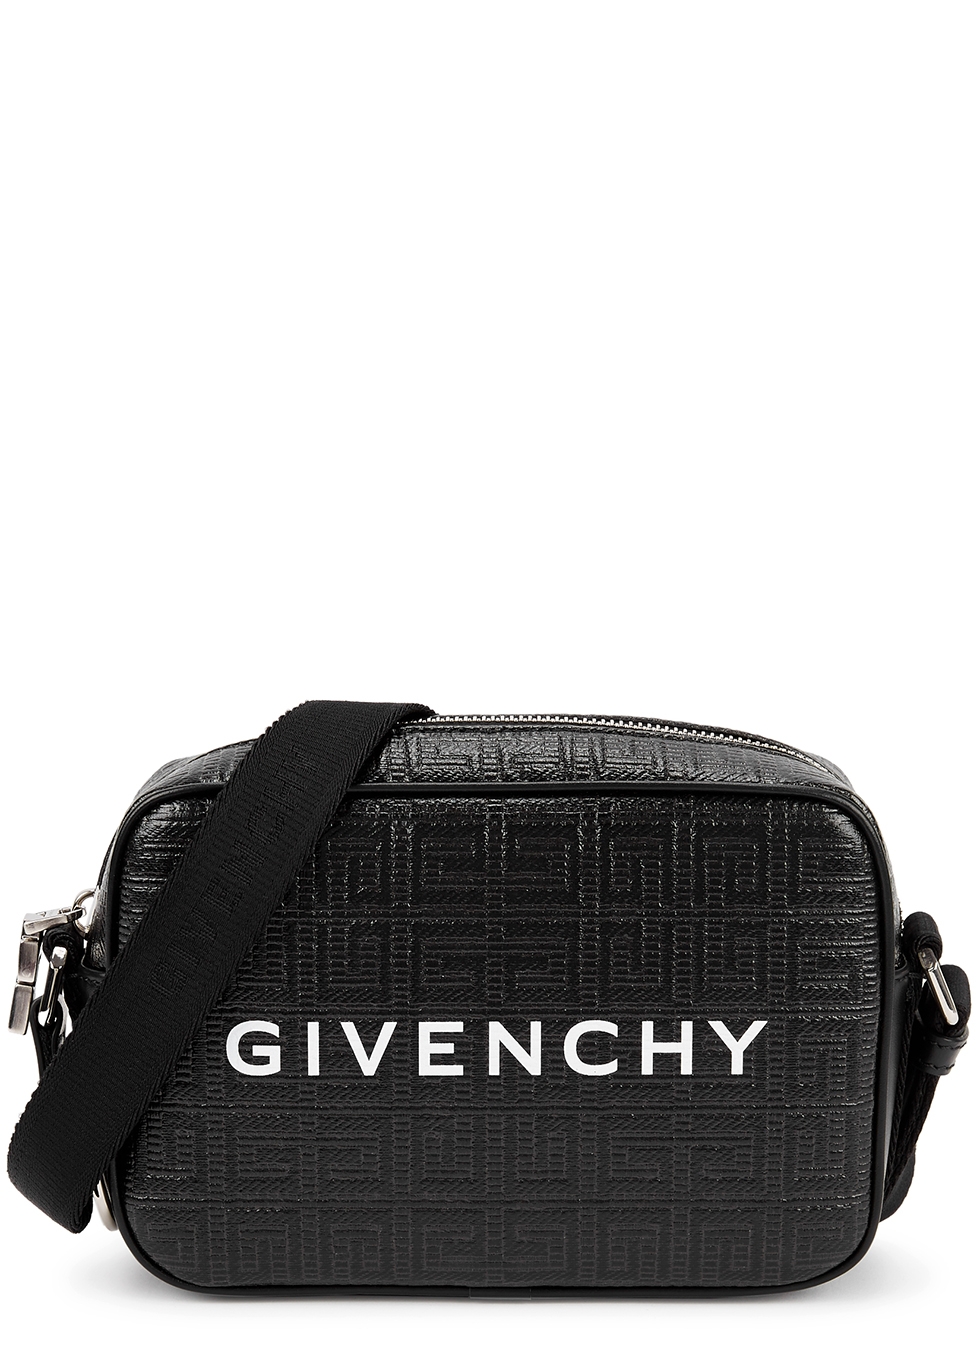 Givenchy 4G monogrammed black leather cross-body bag